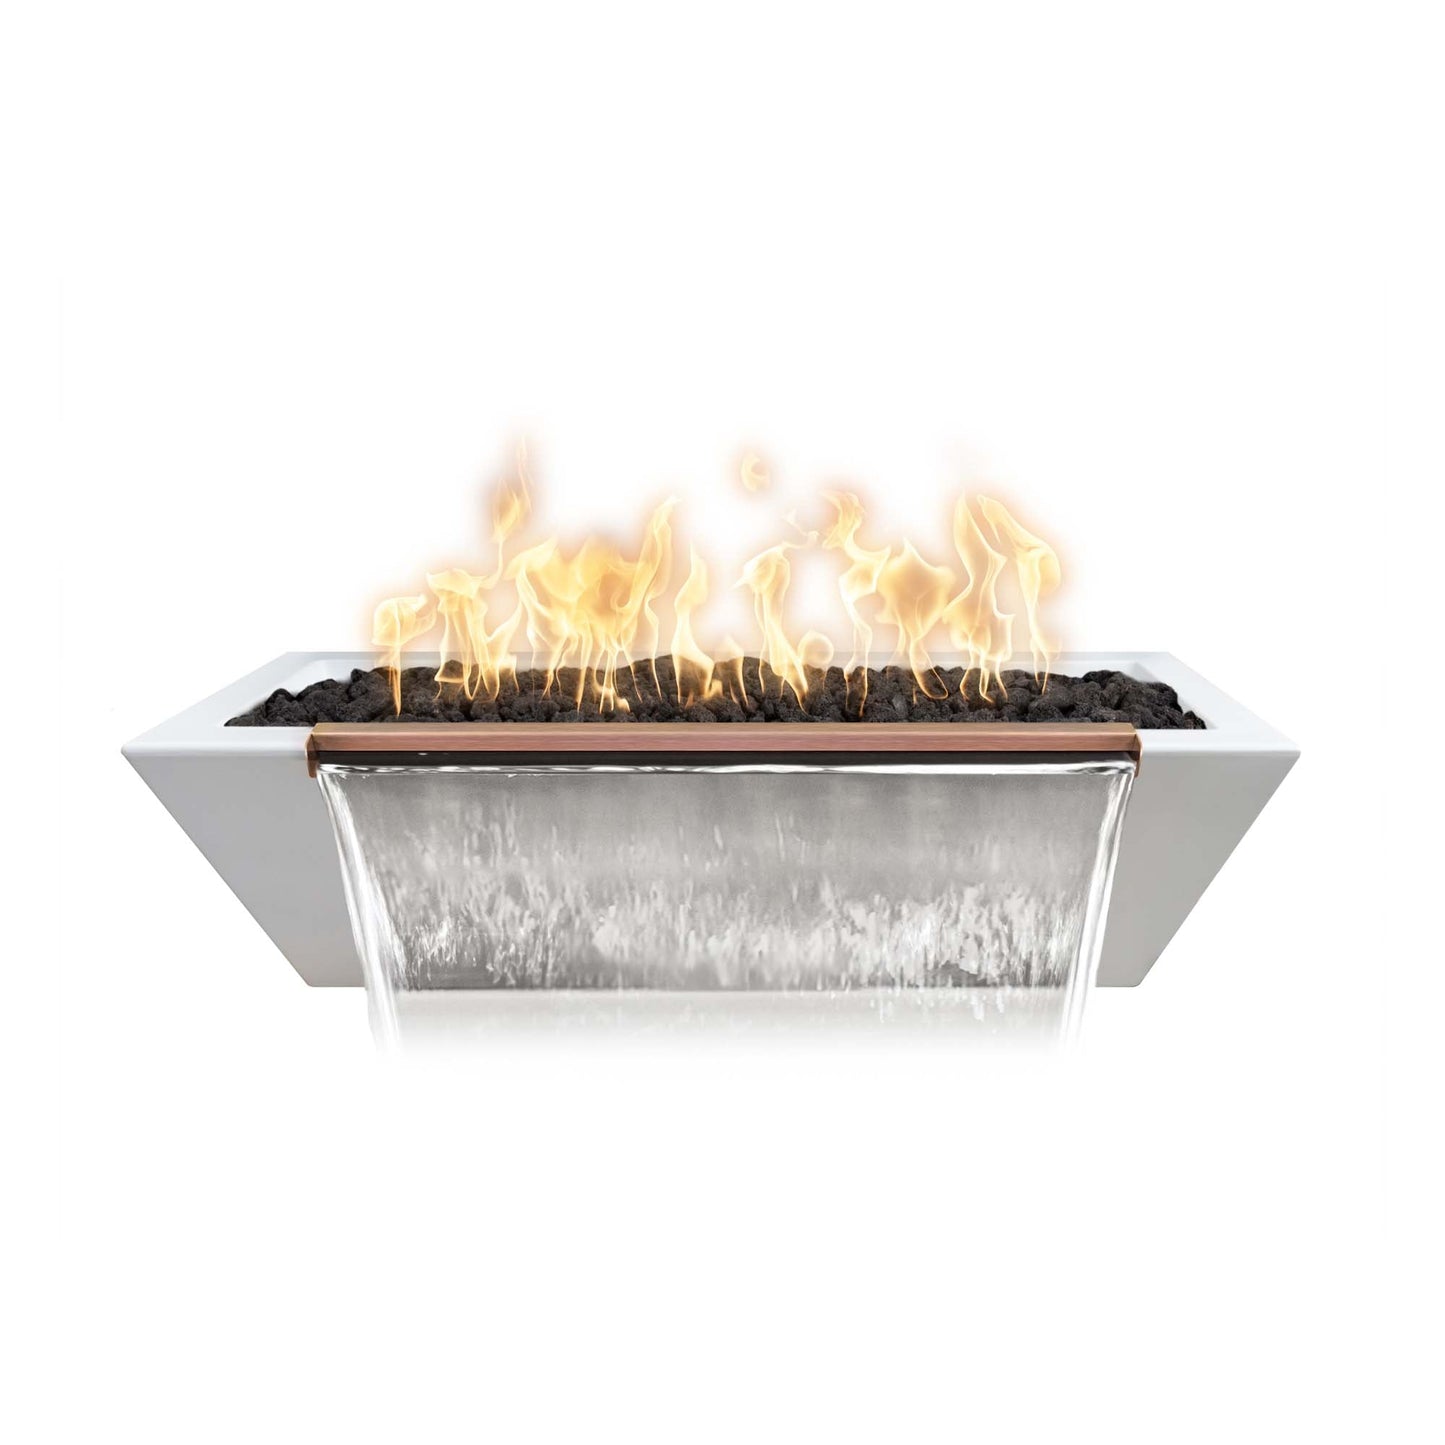 The Outdoor Plus Linear Maya 72" Rustic Coffee GFRC Concrete Liquid Propane Fire & Water Bowl with 12V Electronic Ignition